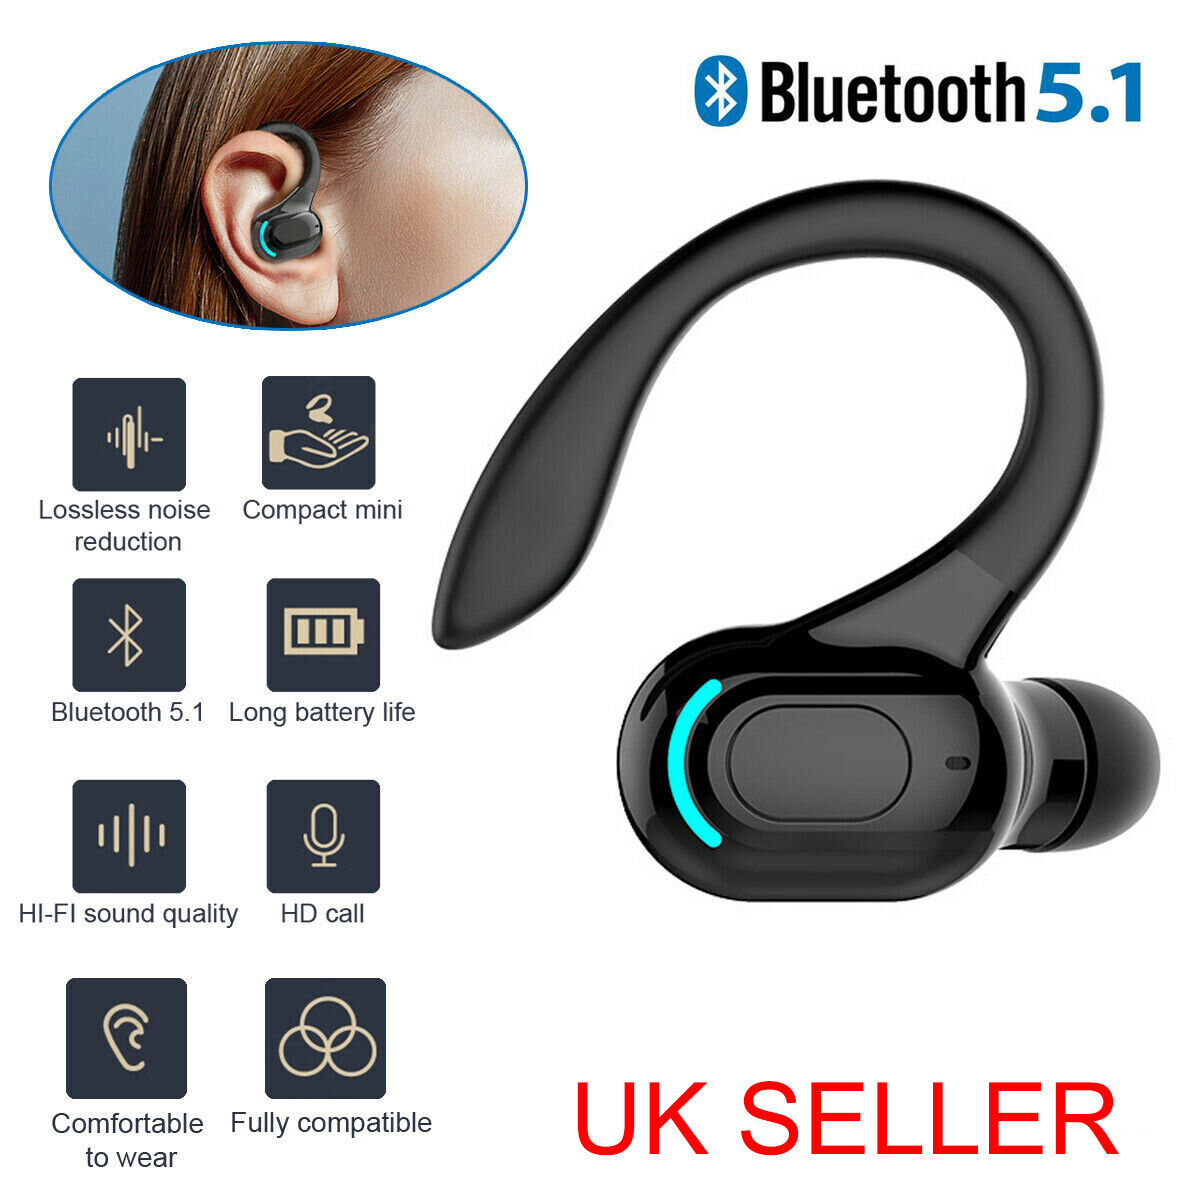 Wireless Noise Cancelling Earbuds - Bluetooth 5.1